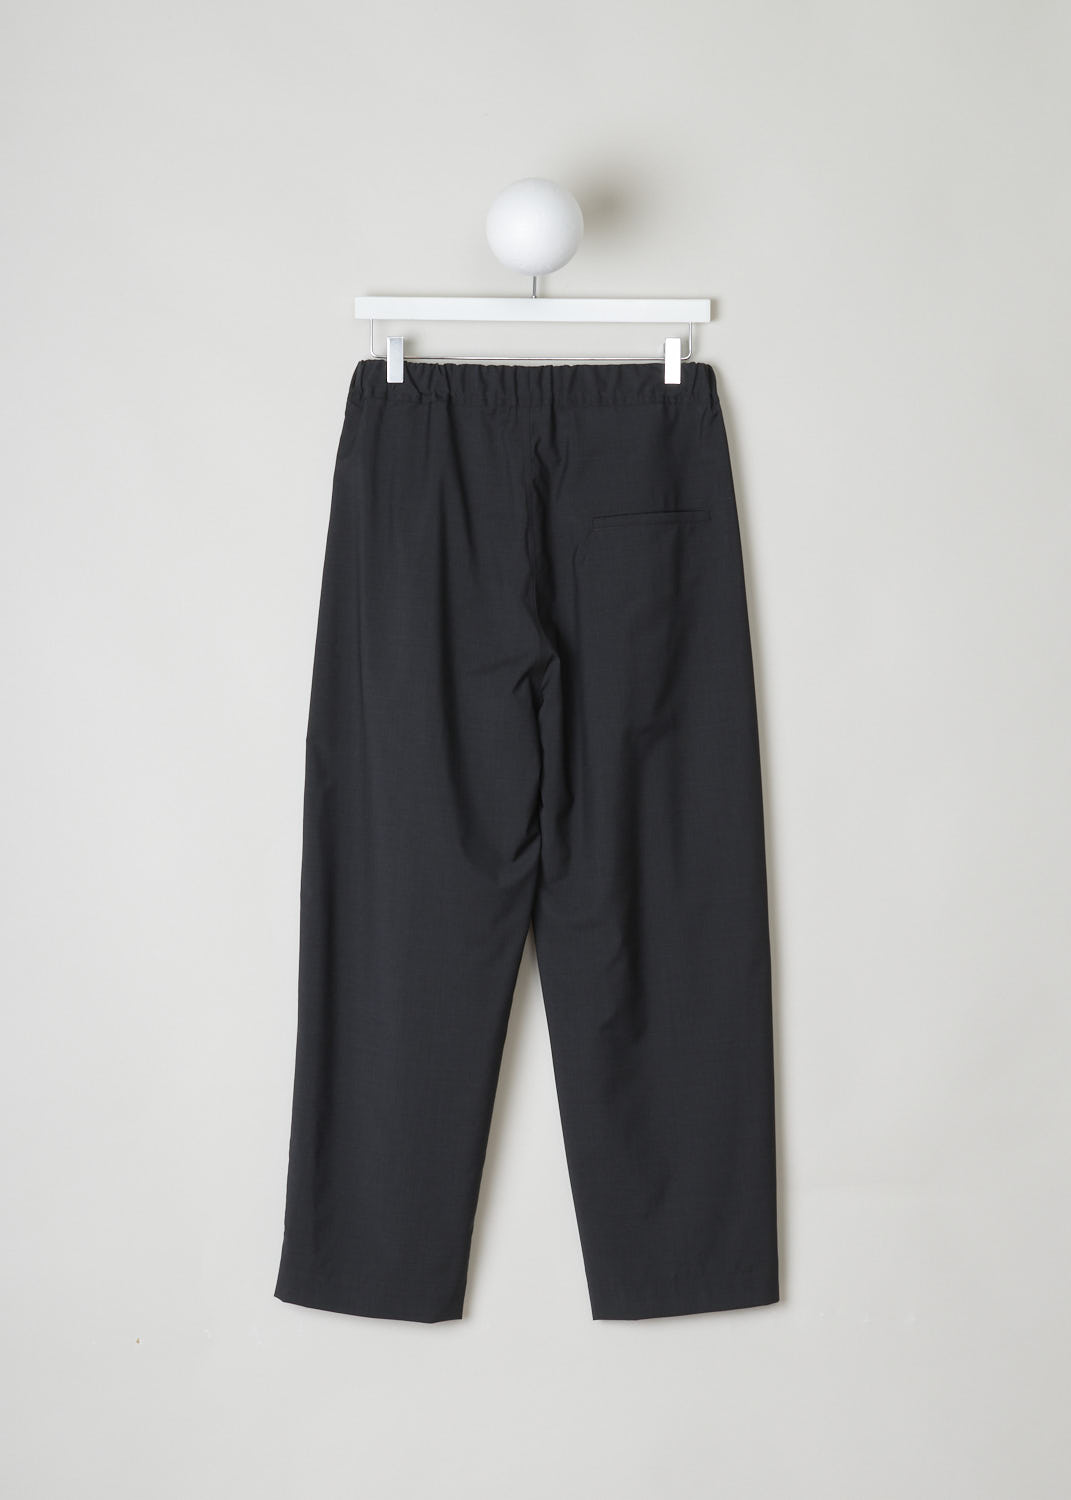 SOFIE Dâ€™HOORE, CHARCOAL PANTS WITH ELASTICATED WAISTBAND, S22_PATIENCE_WOOP_02_CHARCOAL, Grey, Back, These wool, charcoal colored pants have an elastic waistband with a white drawstring on the inside. Slanted pockets can be found on either side. In the back, a single patch pocket can be found. 
